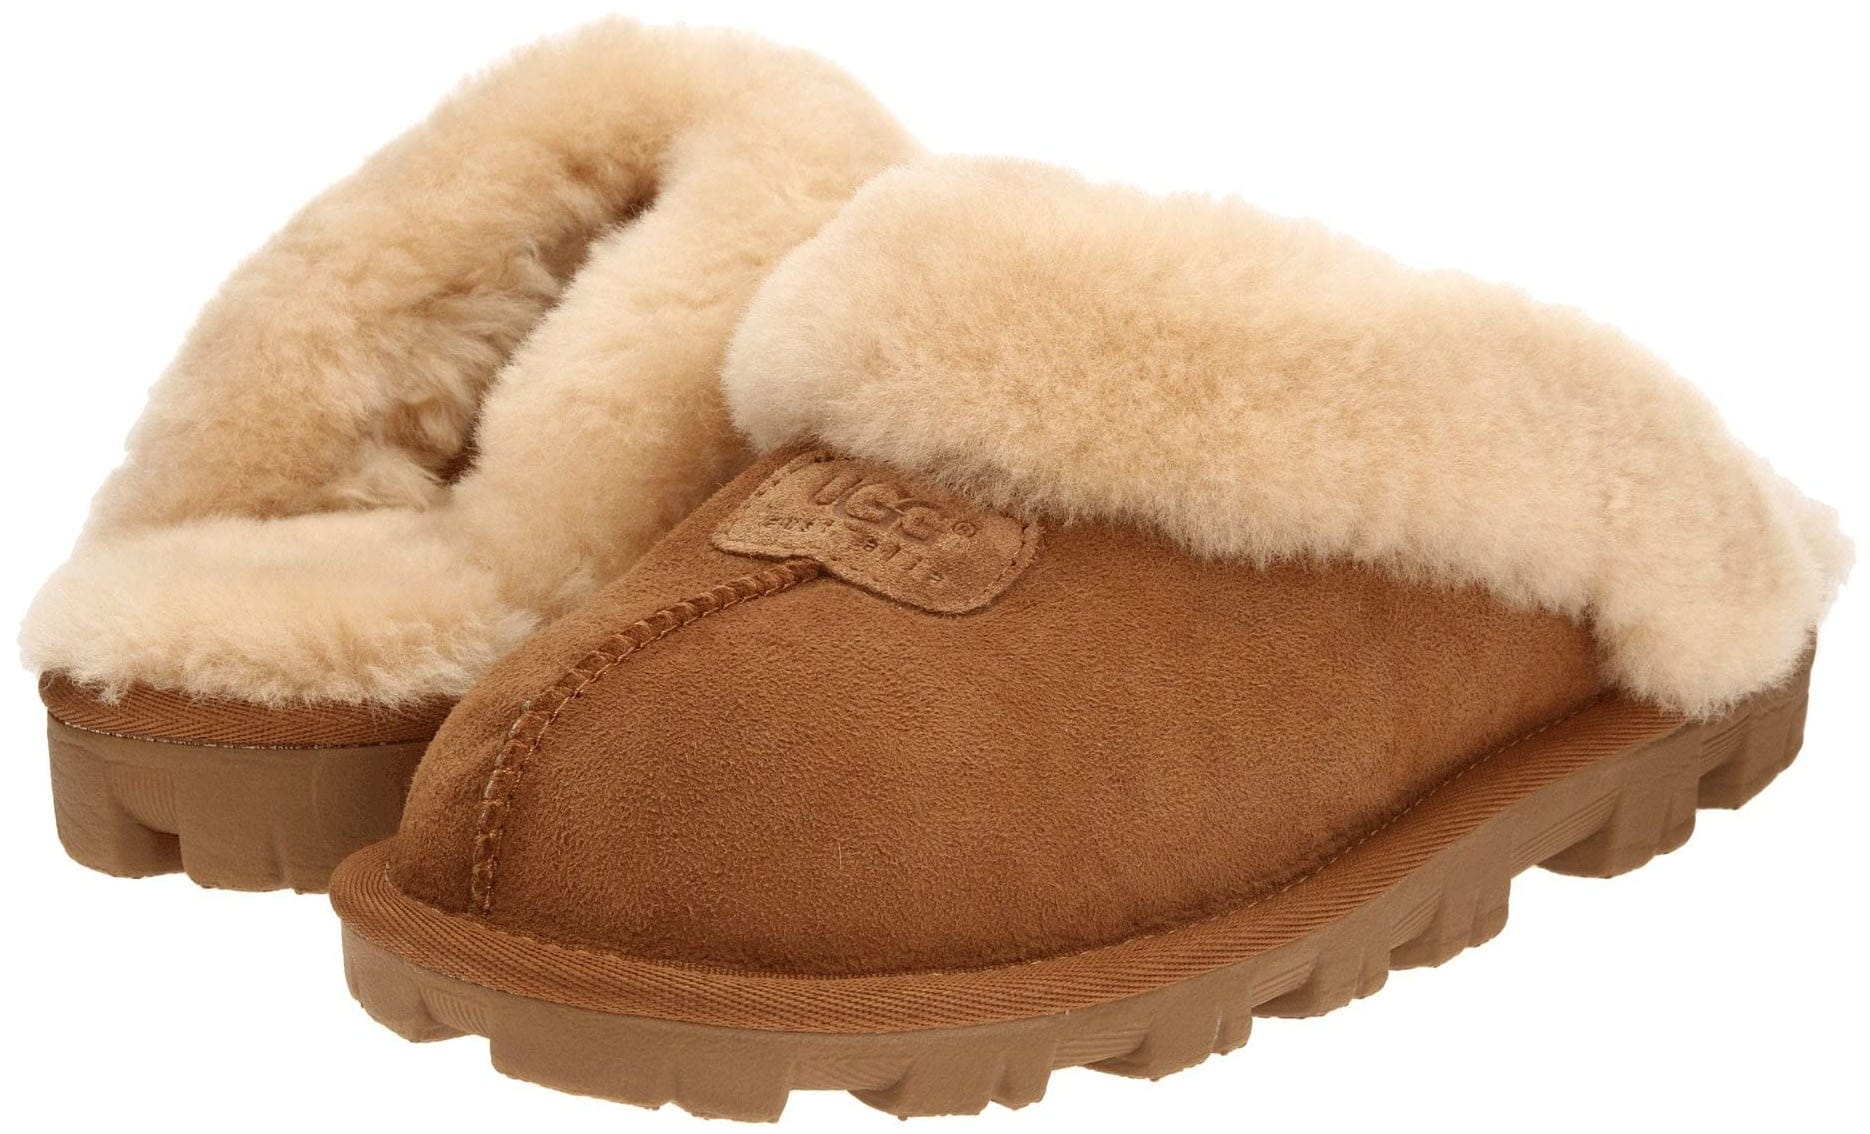 The Ugg Coquette features a twin-face sheepskin upper with moisture-wicking sockliner and Treadlite soles